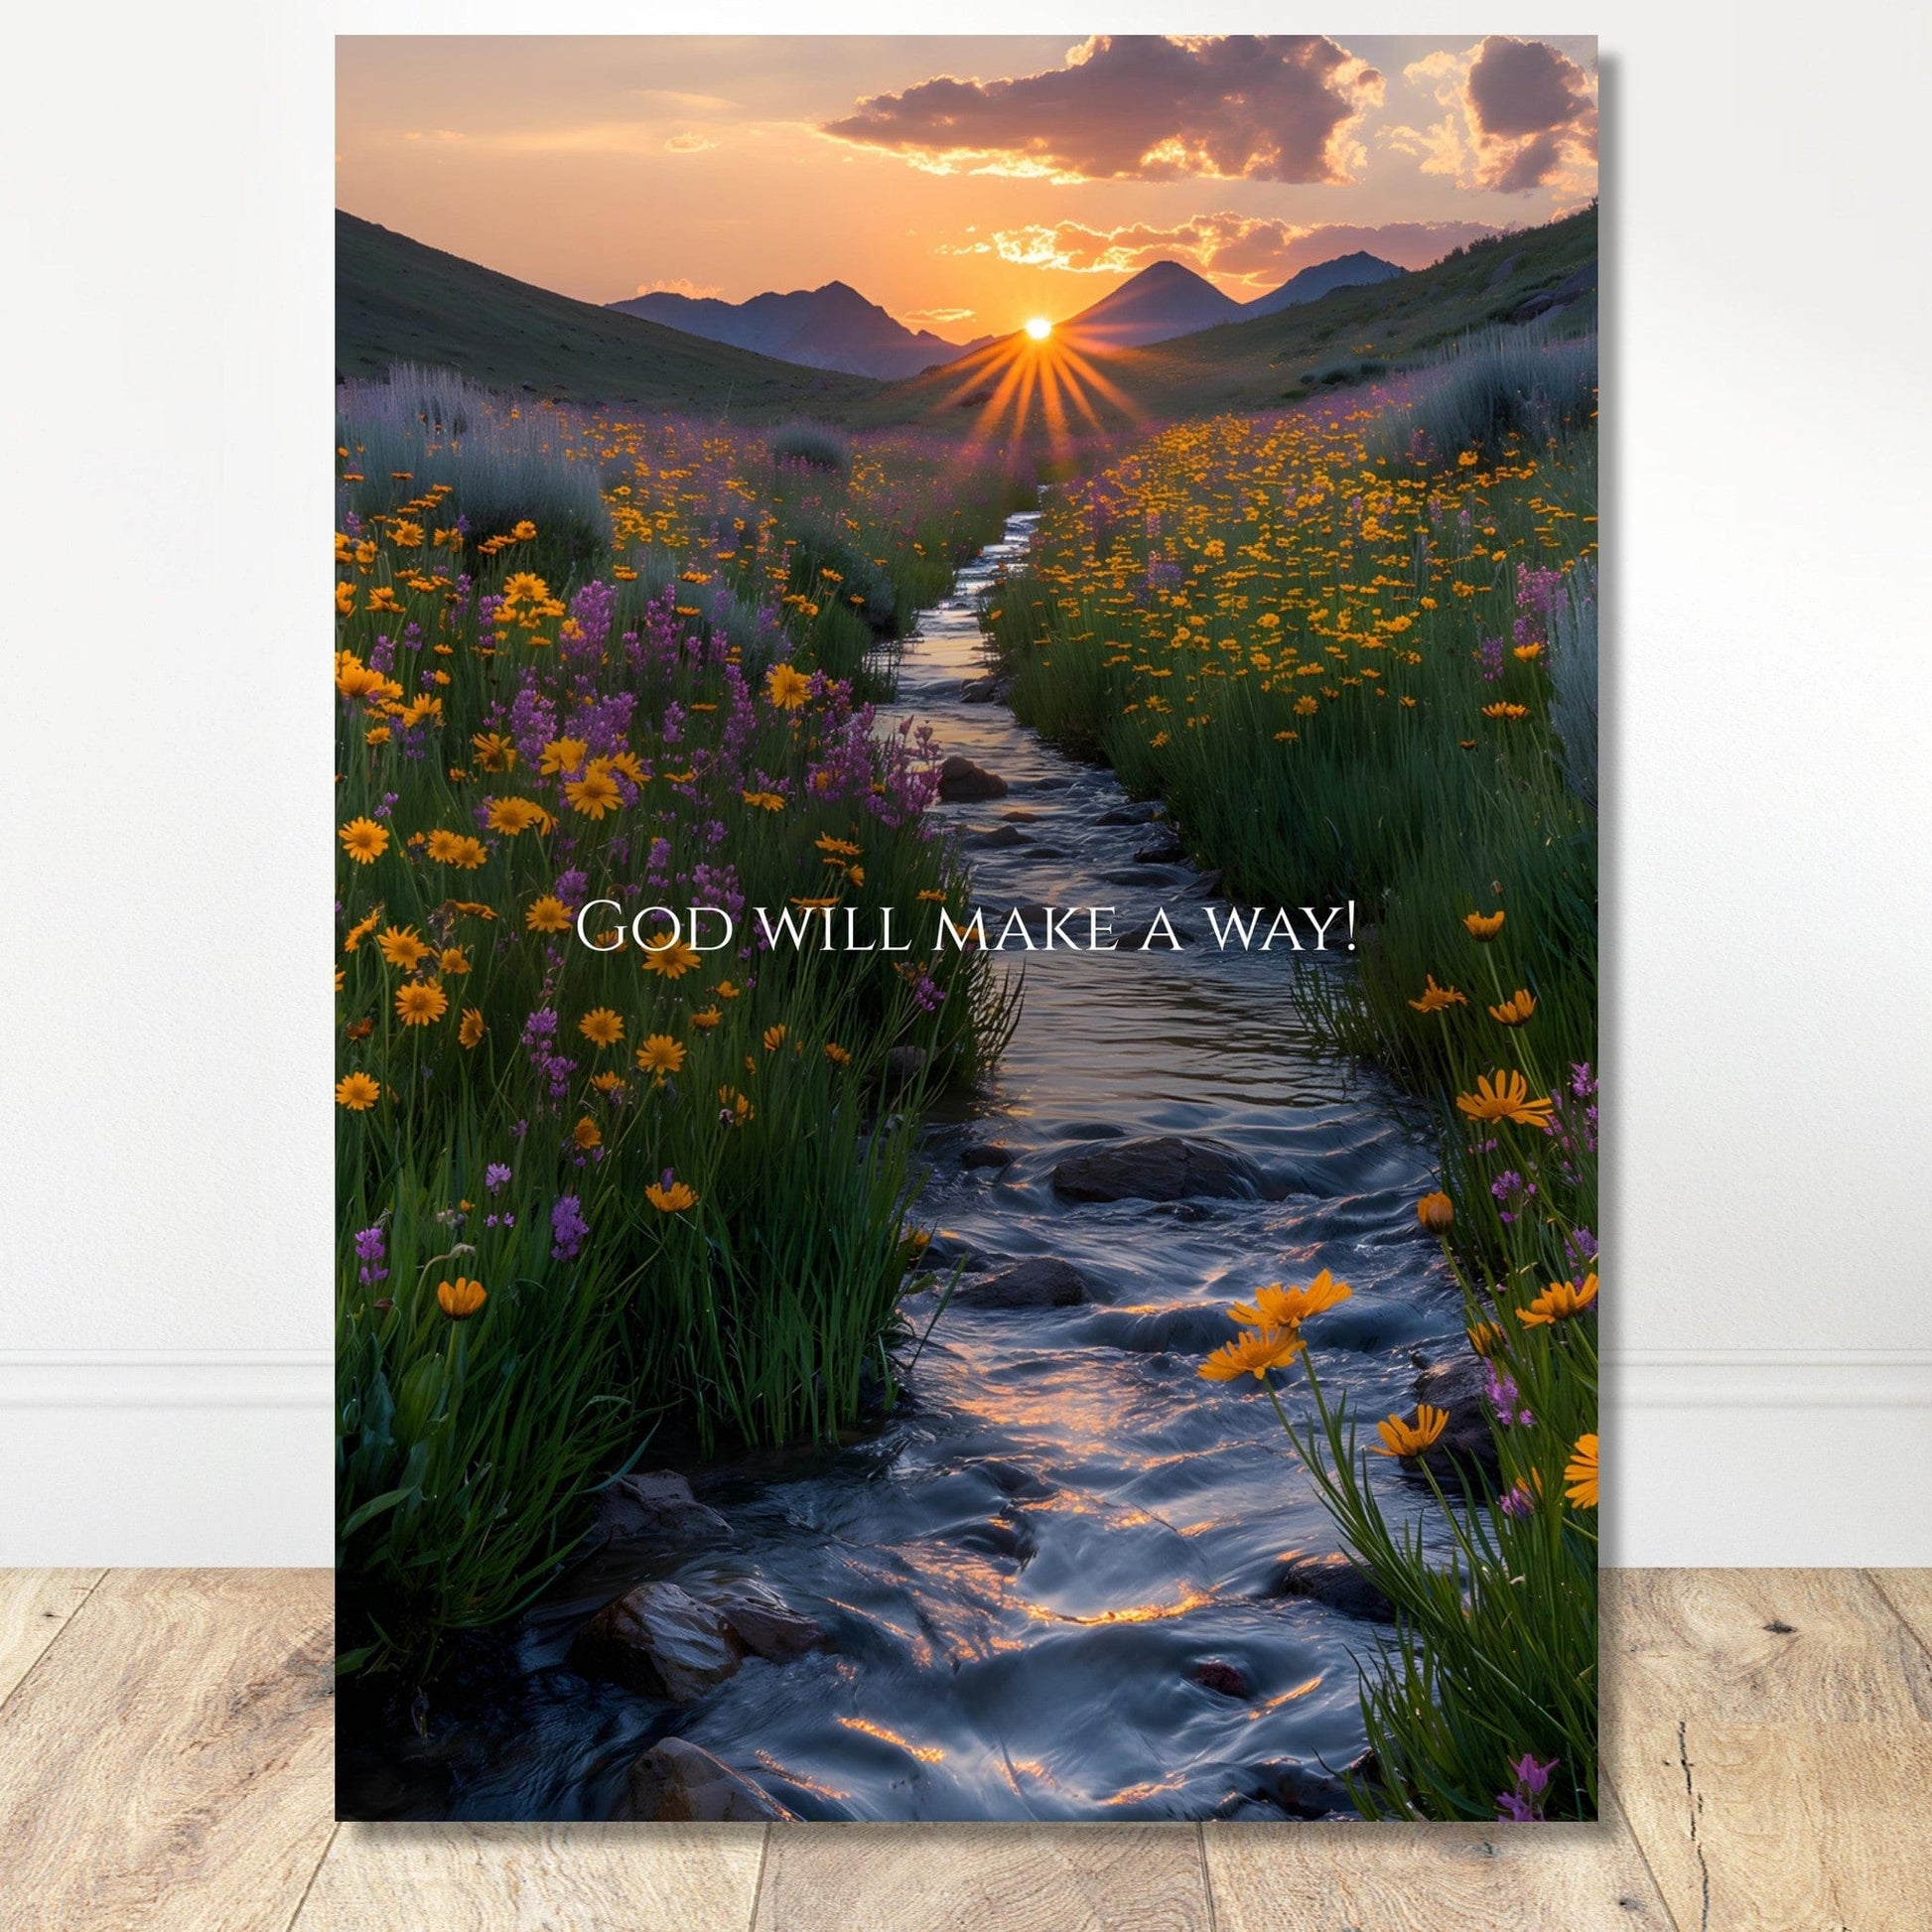 Coffee With My Father Print Material 21x29.7 cm / 8x12″ / Unframed / Unframed - Poster Only God Will Make A Way - Custom Art